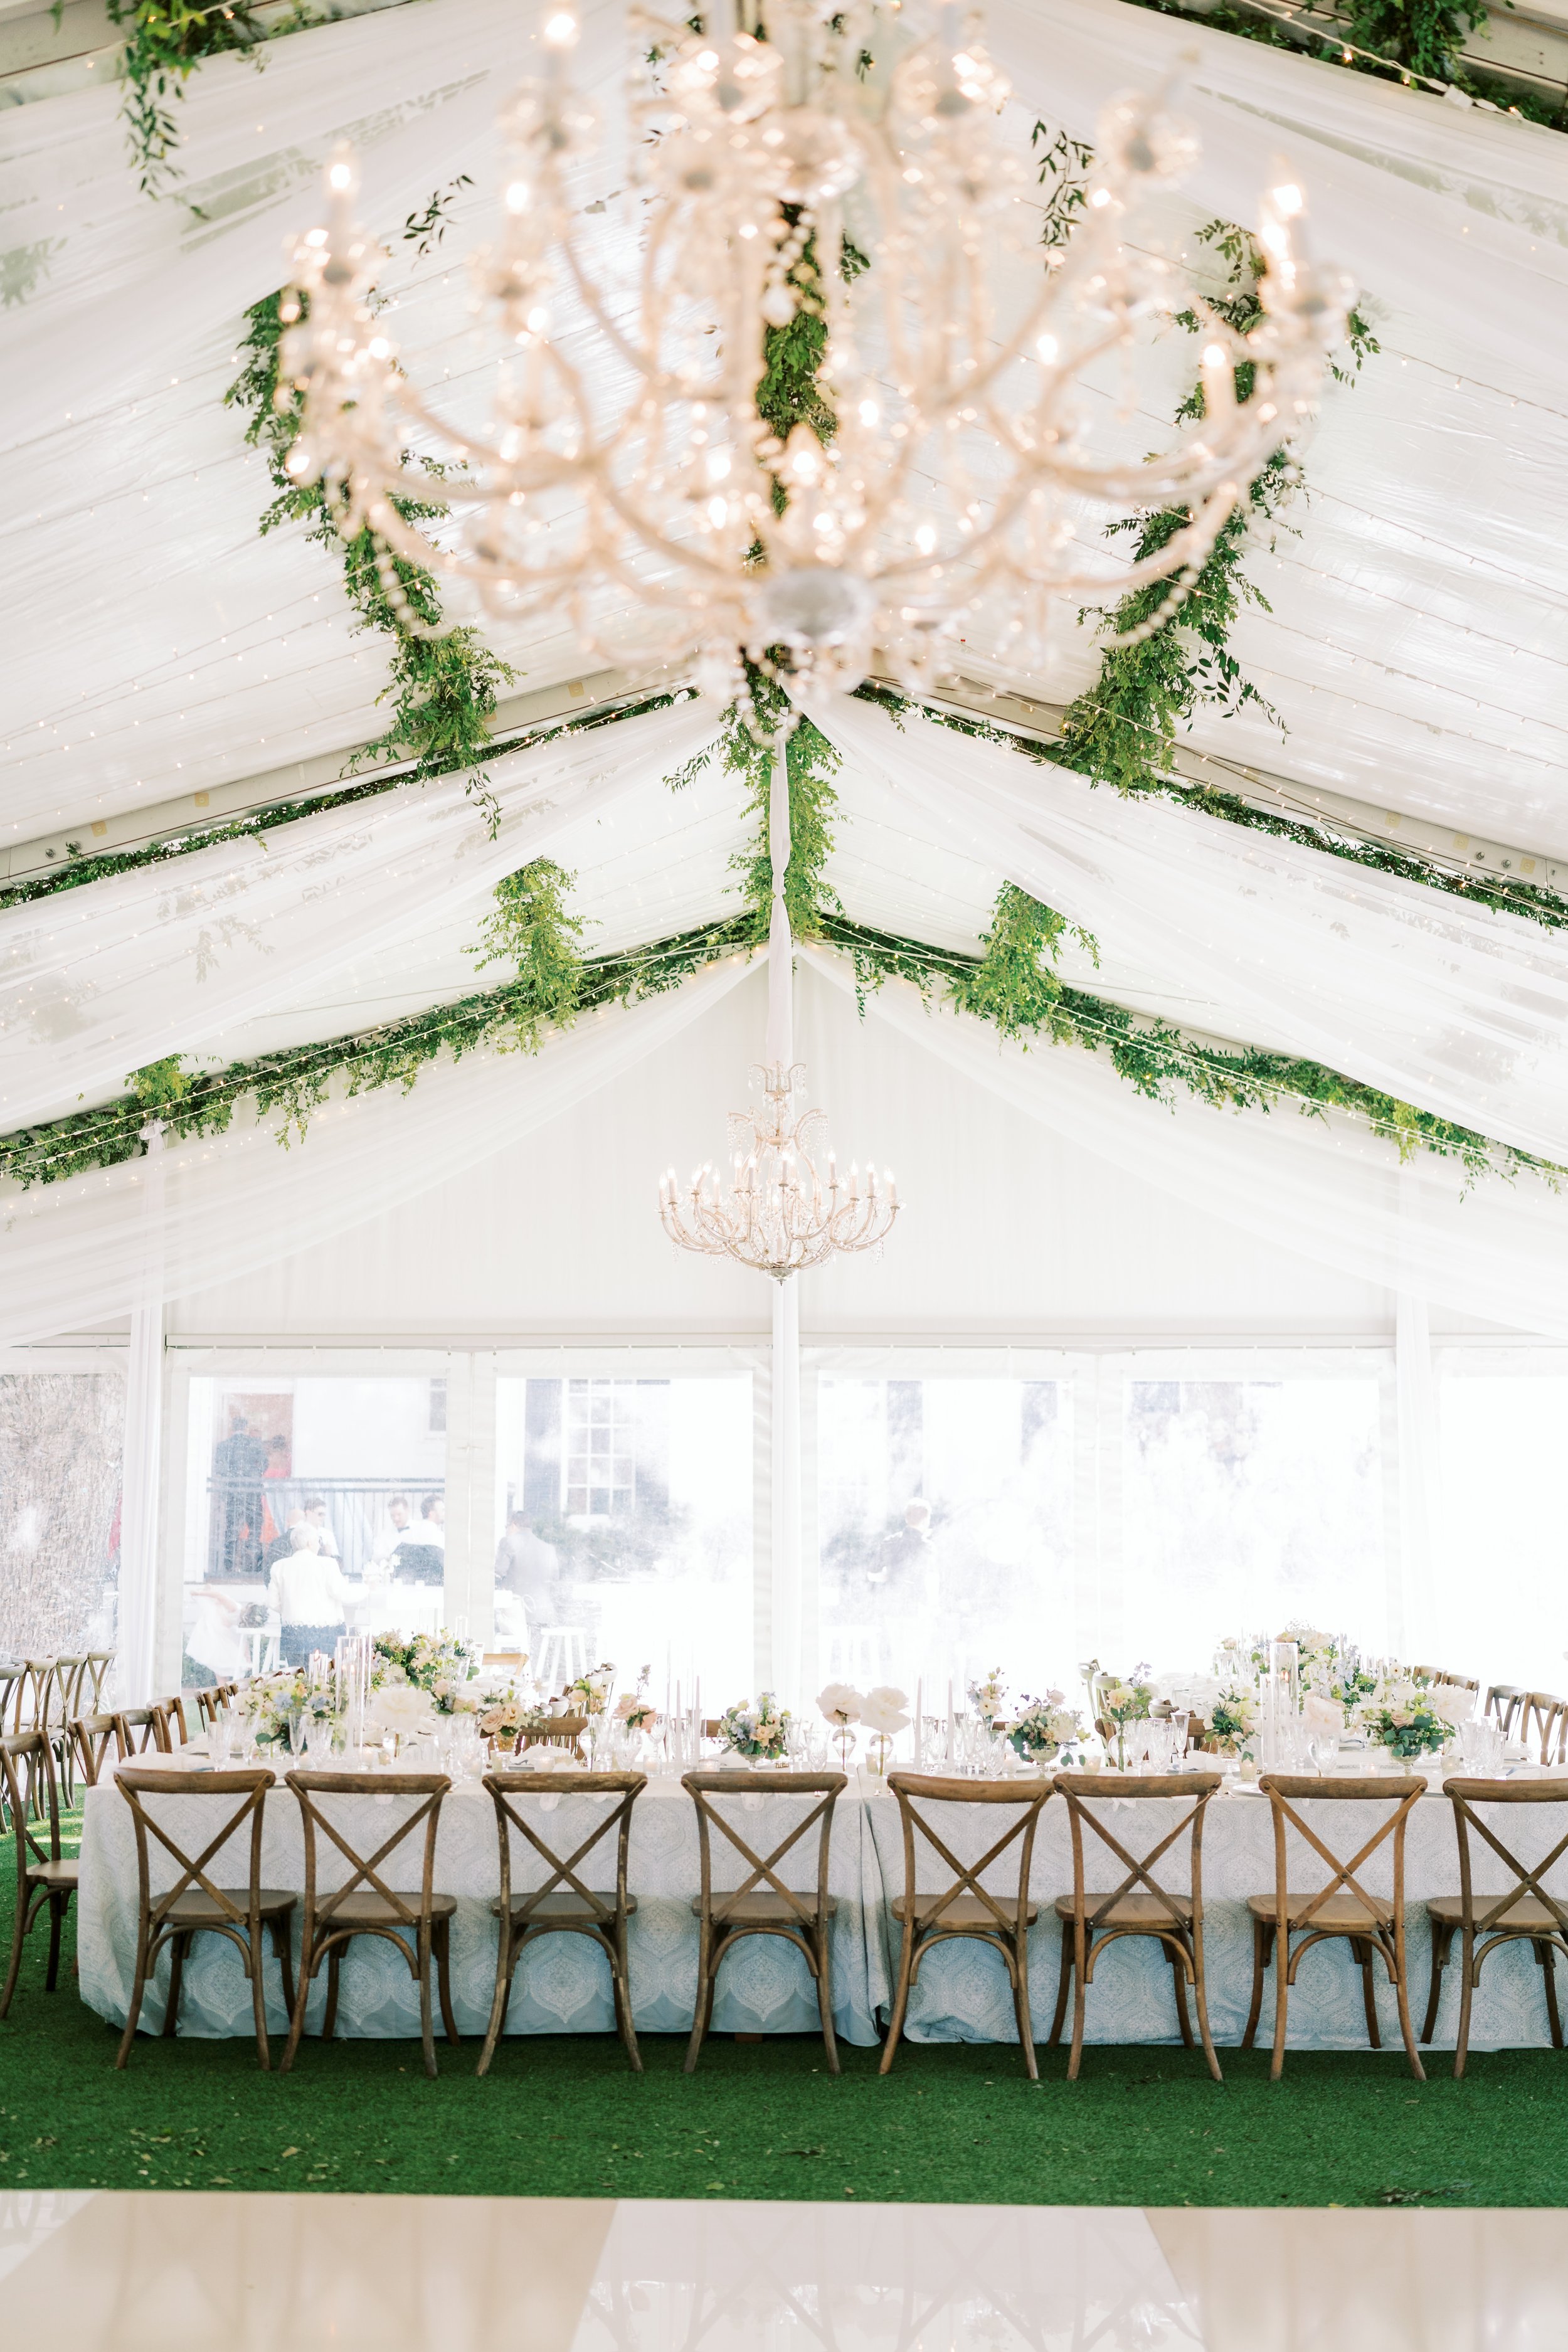 Pink-Champagne-Designs-timeless-wedding-venue-tents